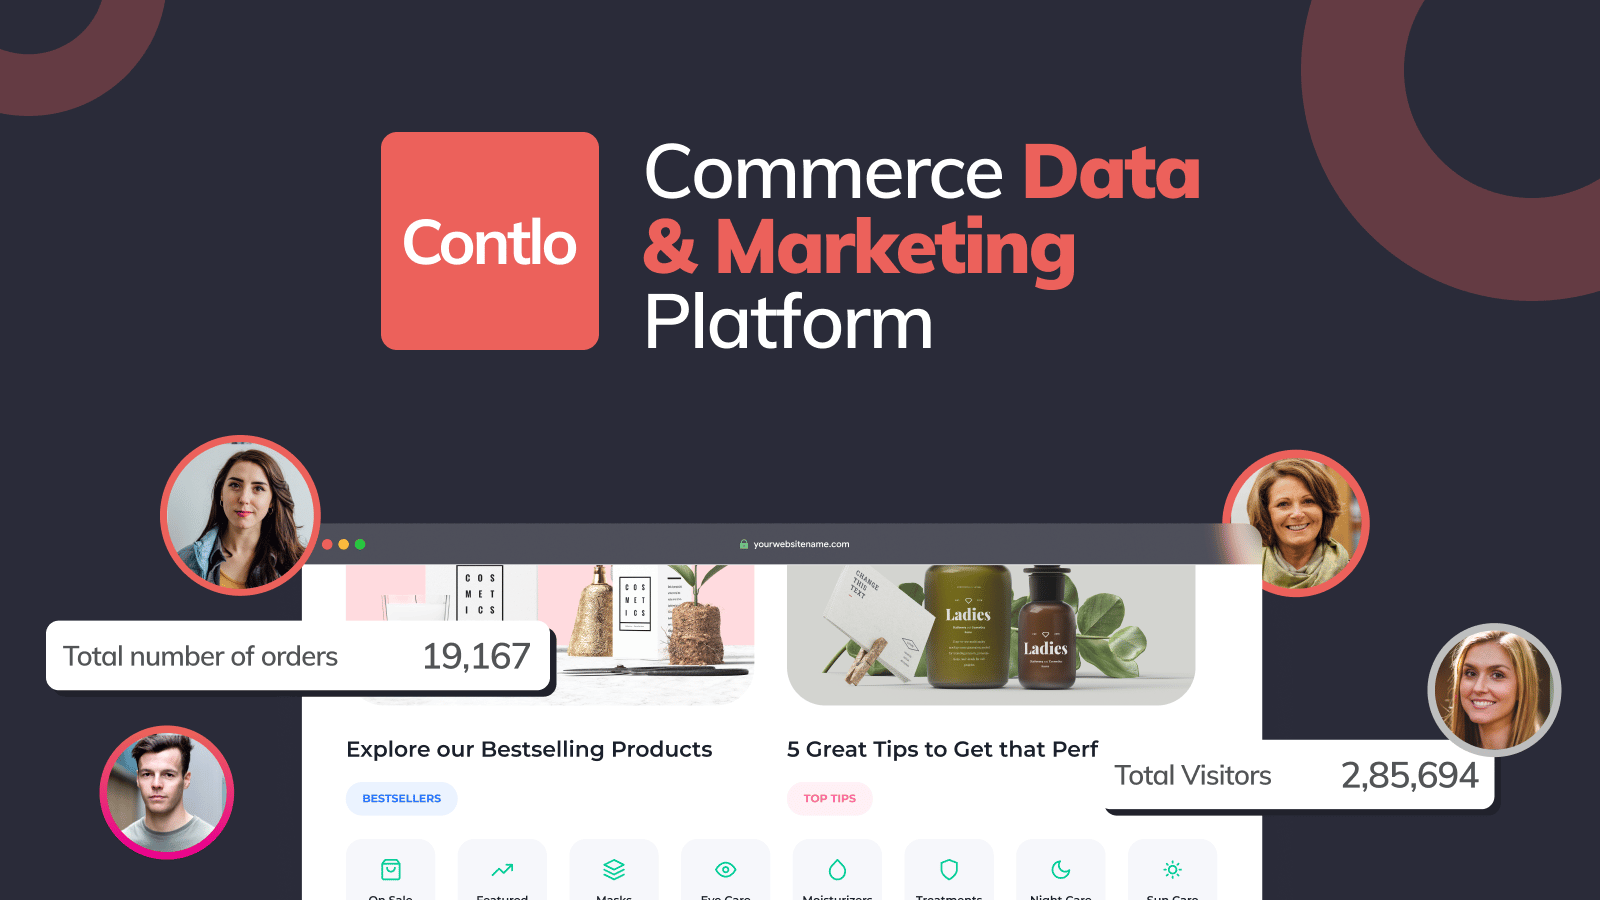 Contlo Raises $3.5M Seed Round to reinvent marketing with AI